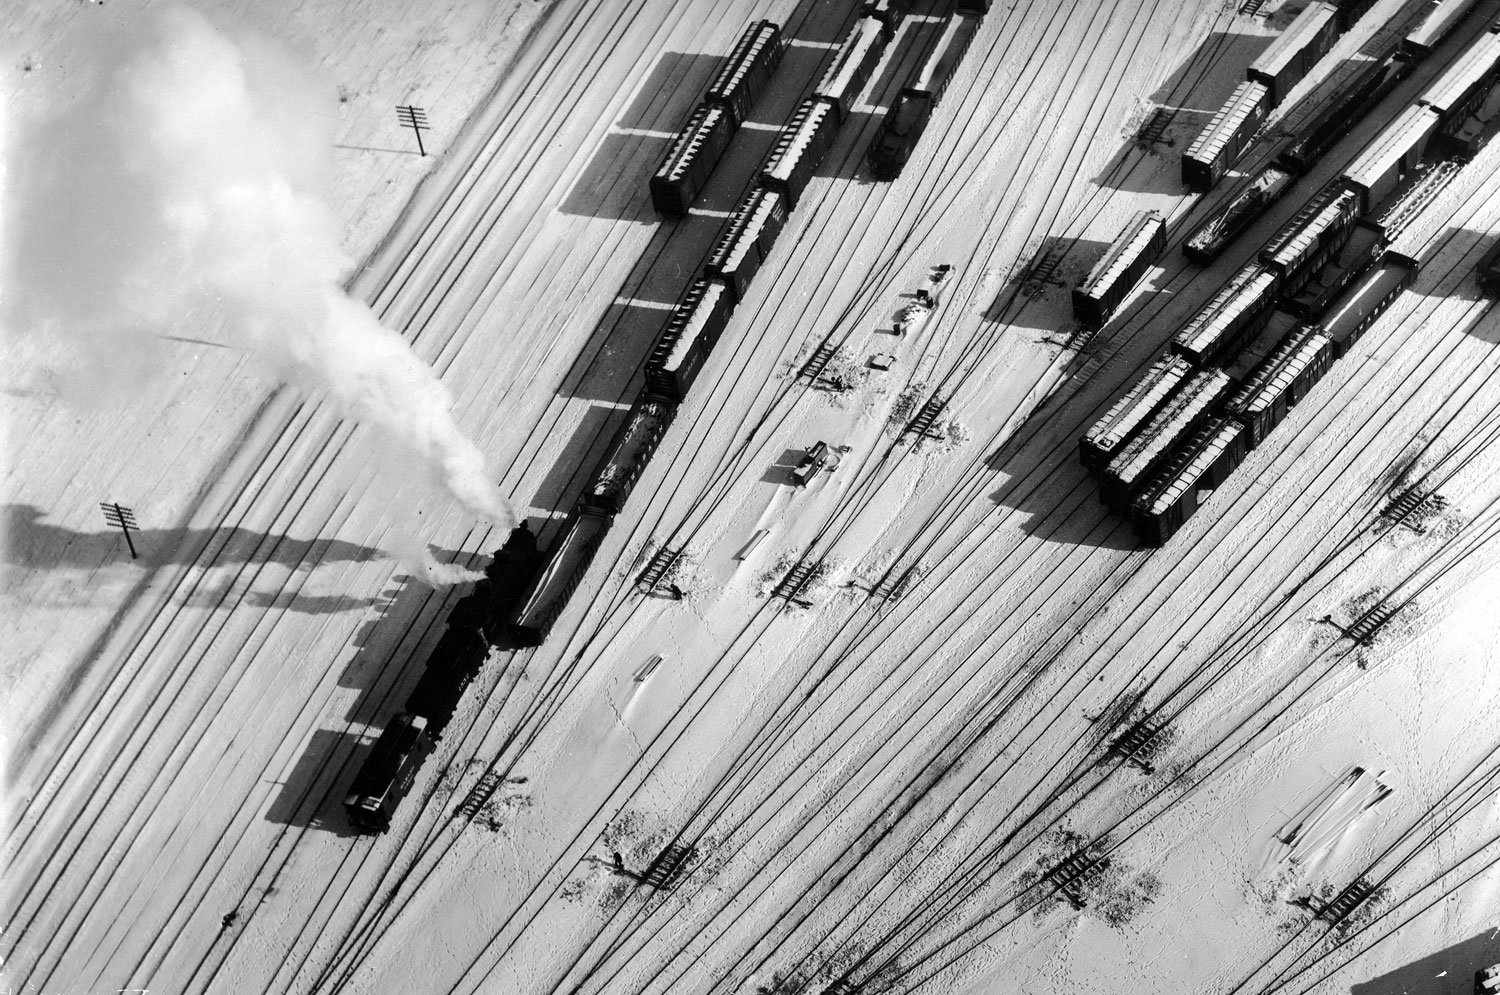 Trains after snowfall, Chicago, photographed from a helicopter, 1952.